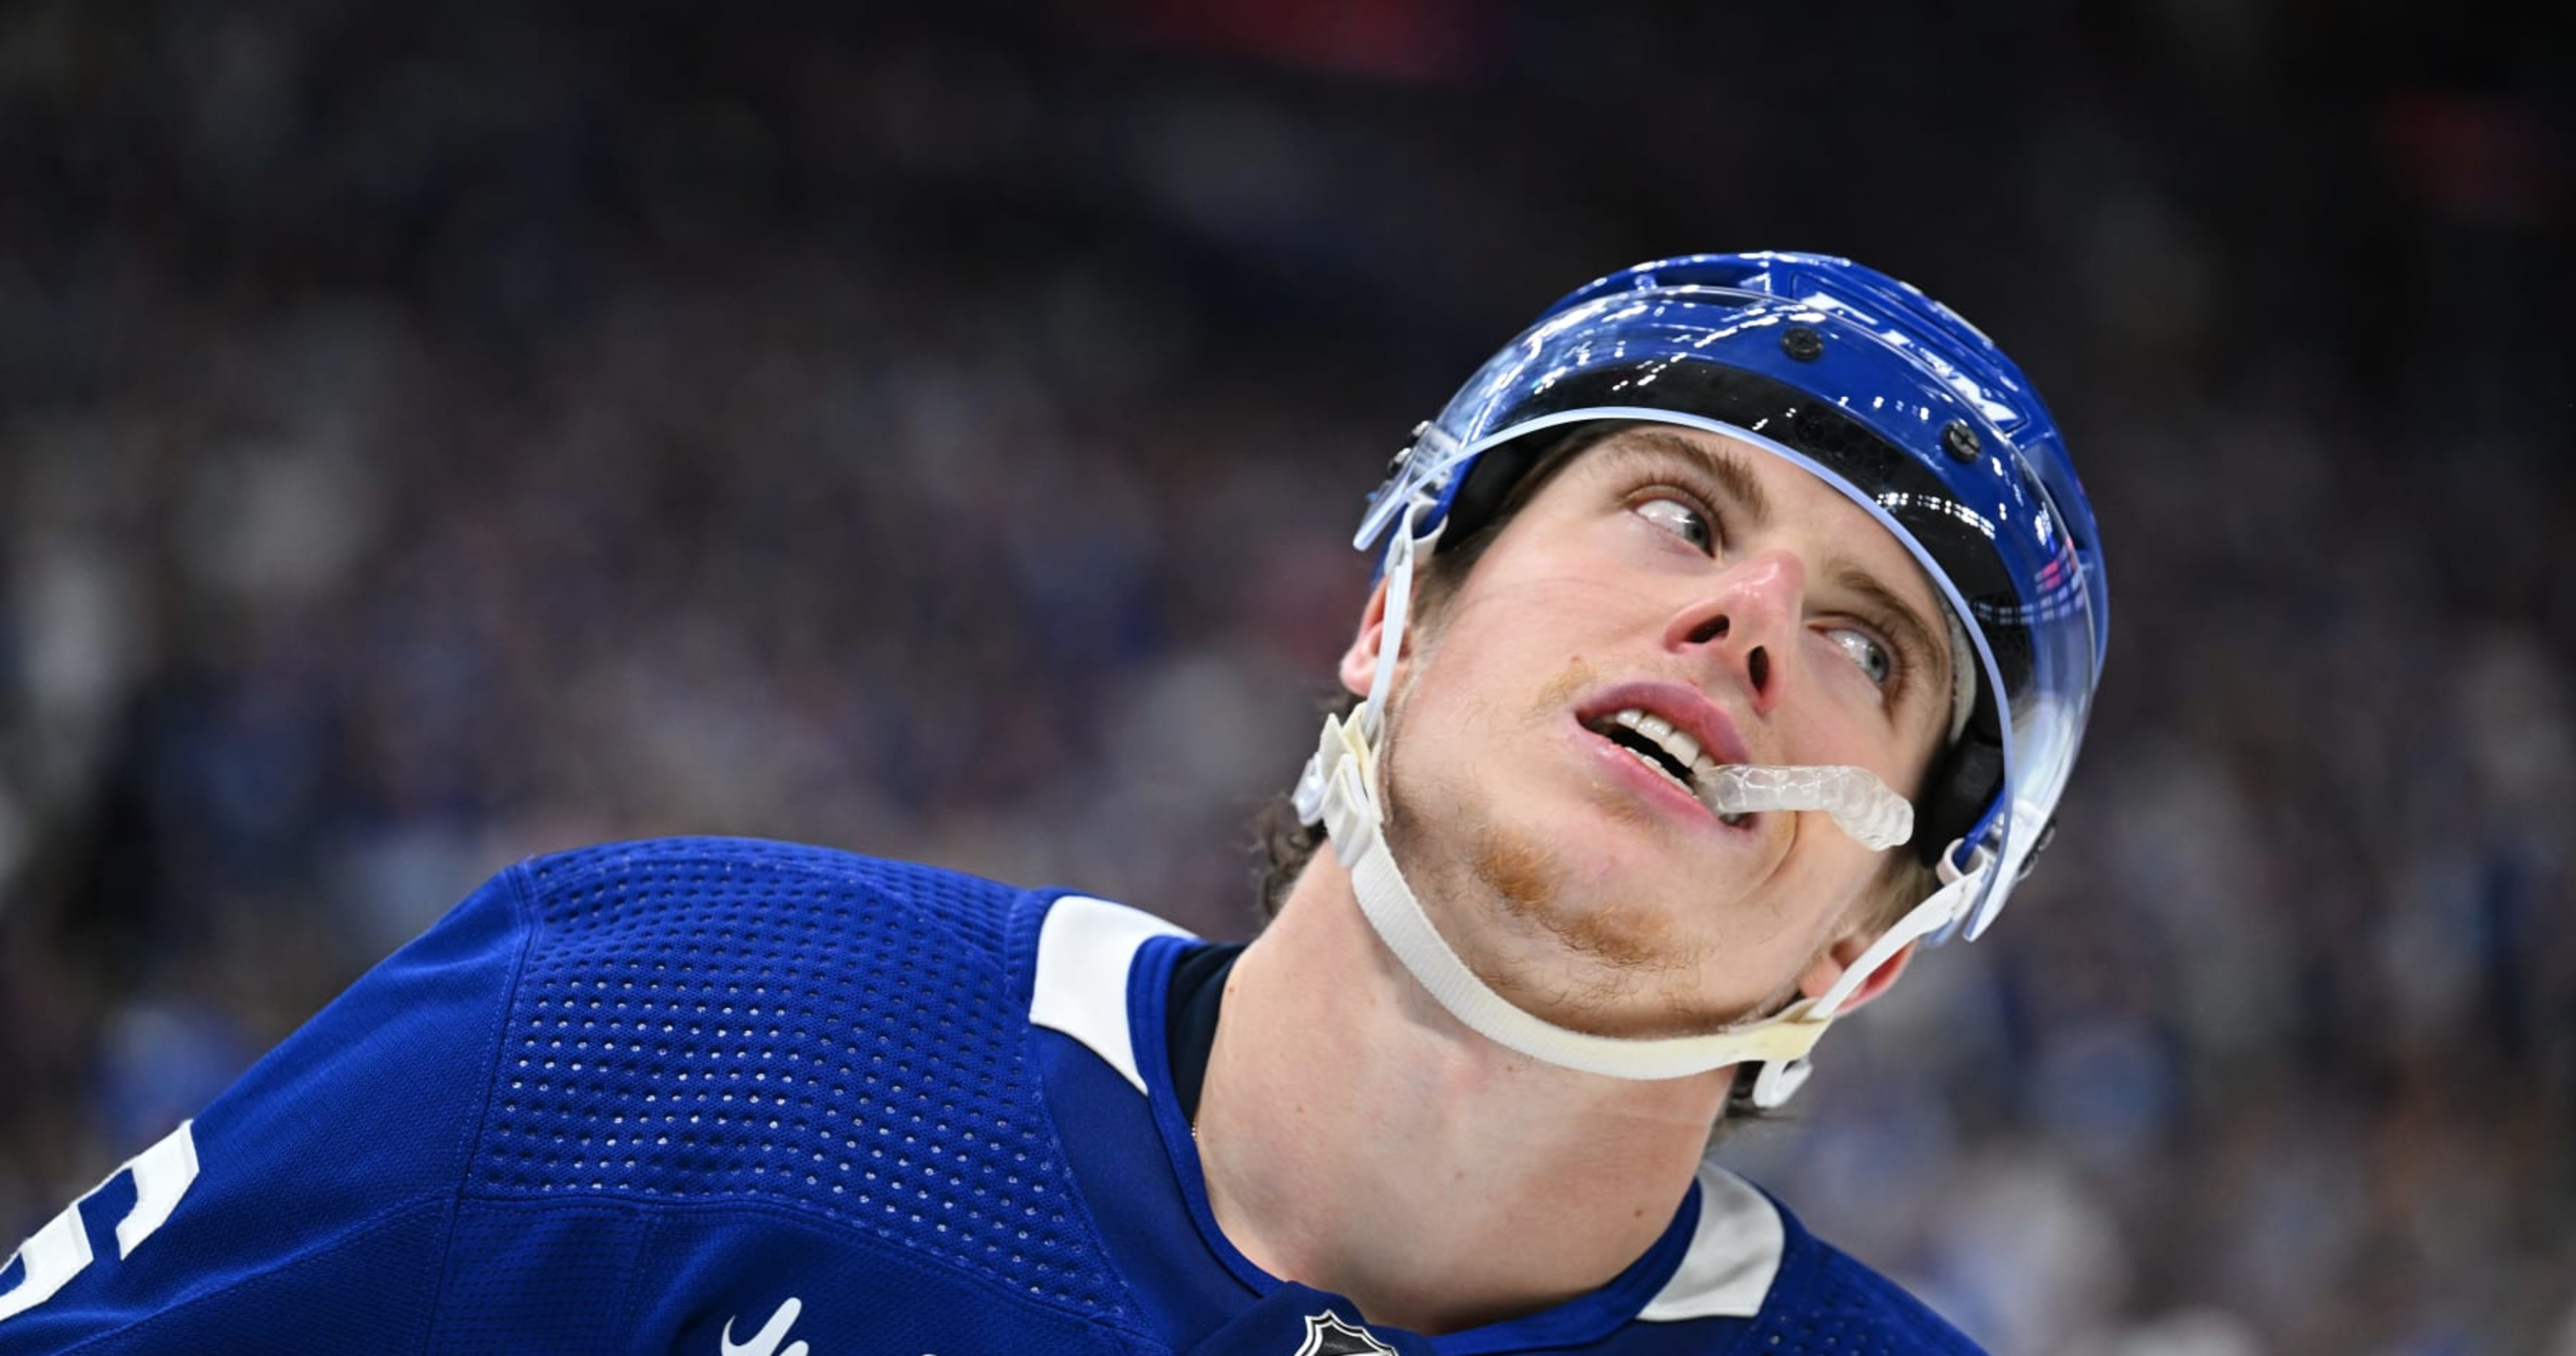 Leafs star Mitch Marner opens up about pressure of playing in Toronto